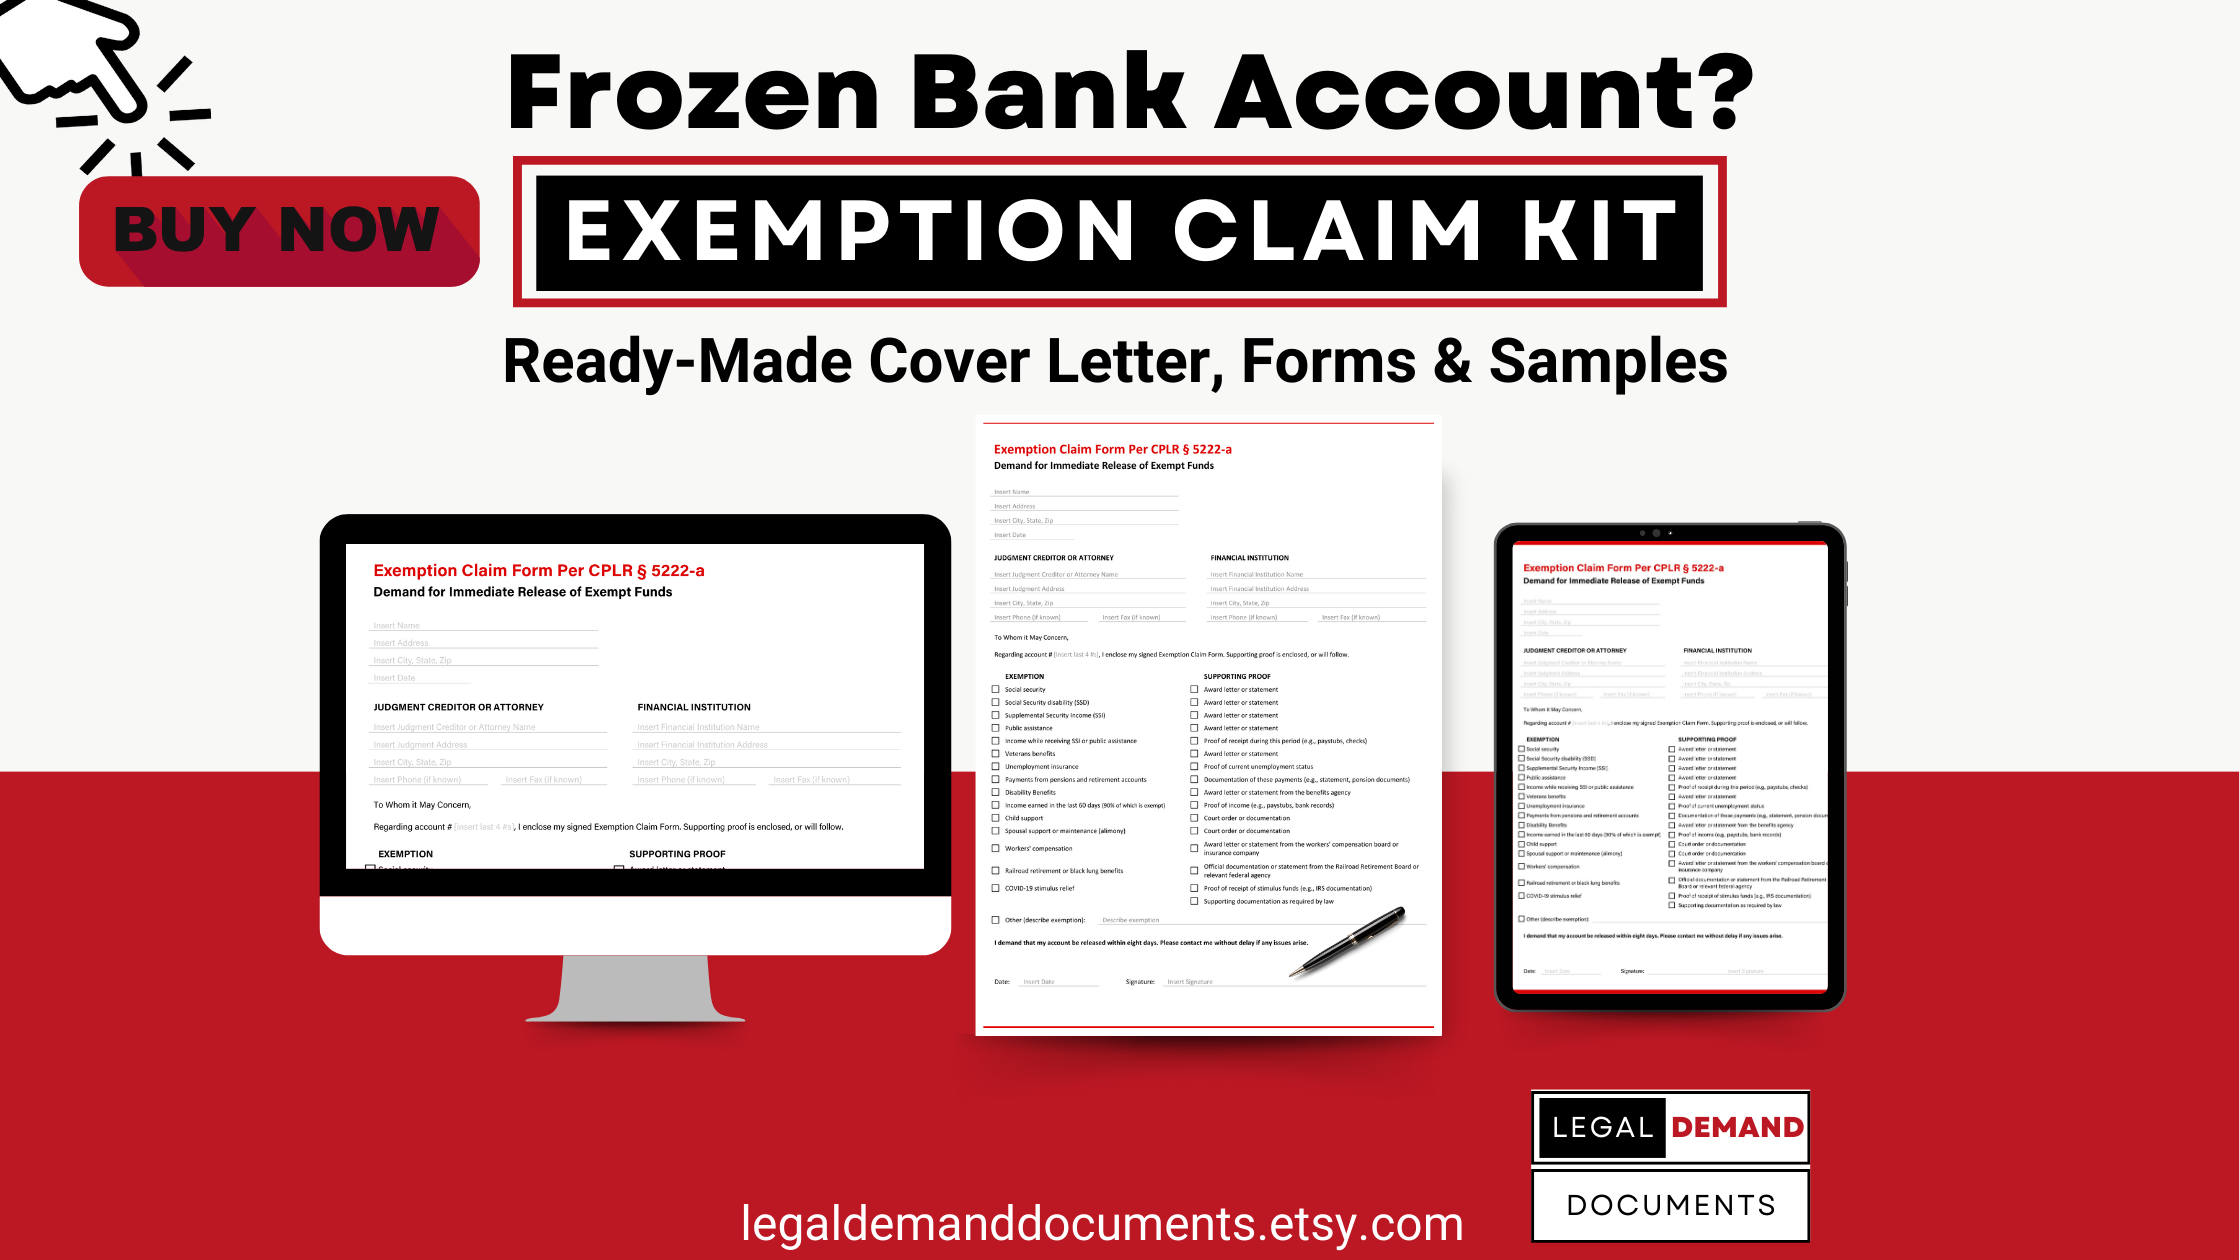 Fillable Exemption Claim Form and Cover Letter by Jesse Langel, for NY bank hold releases under CPLR § 5222-a.